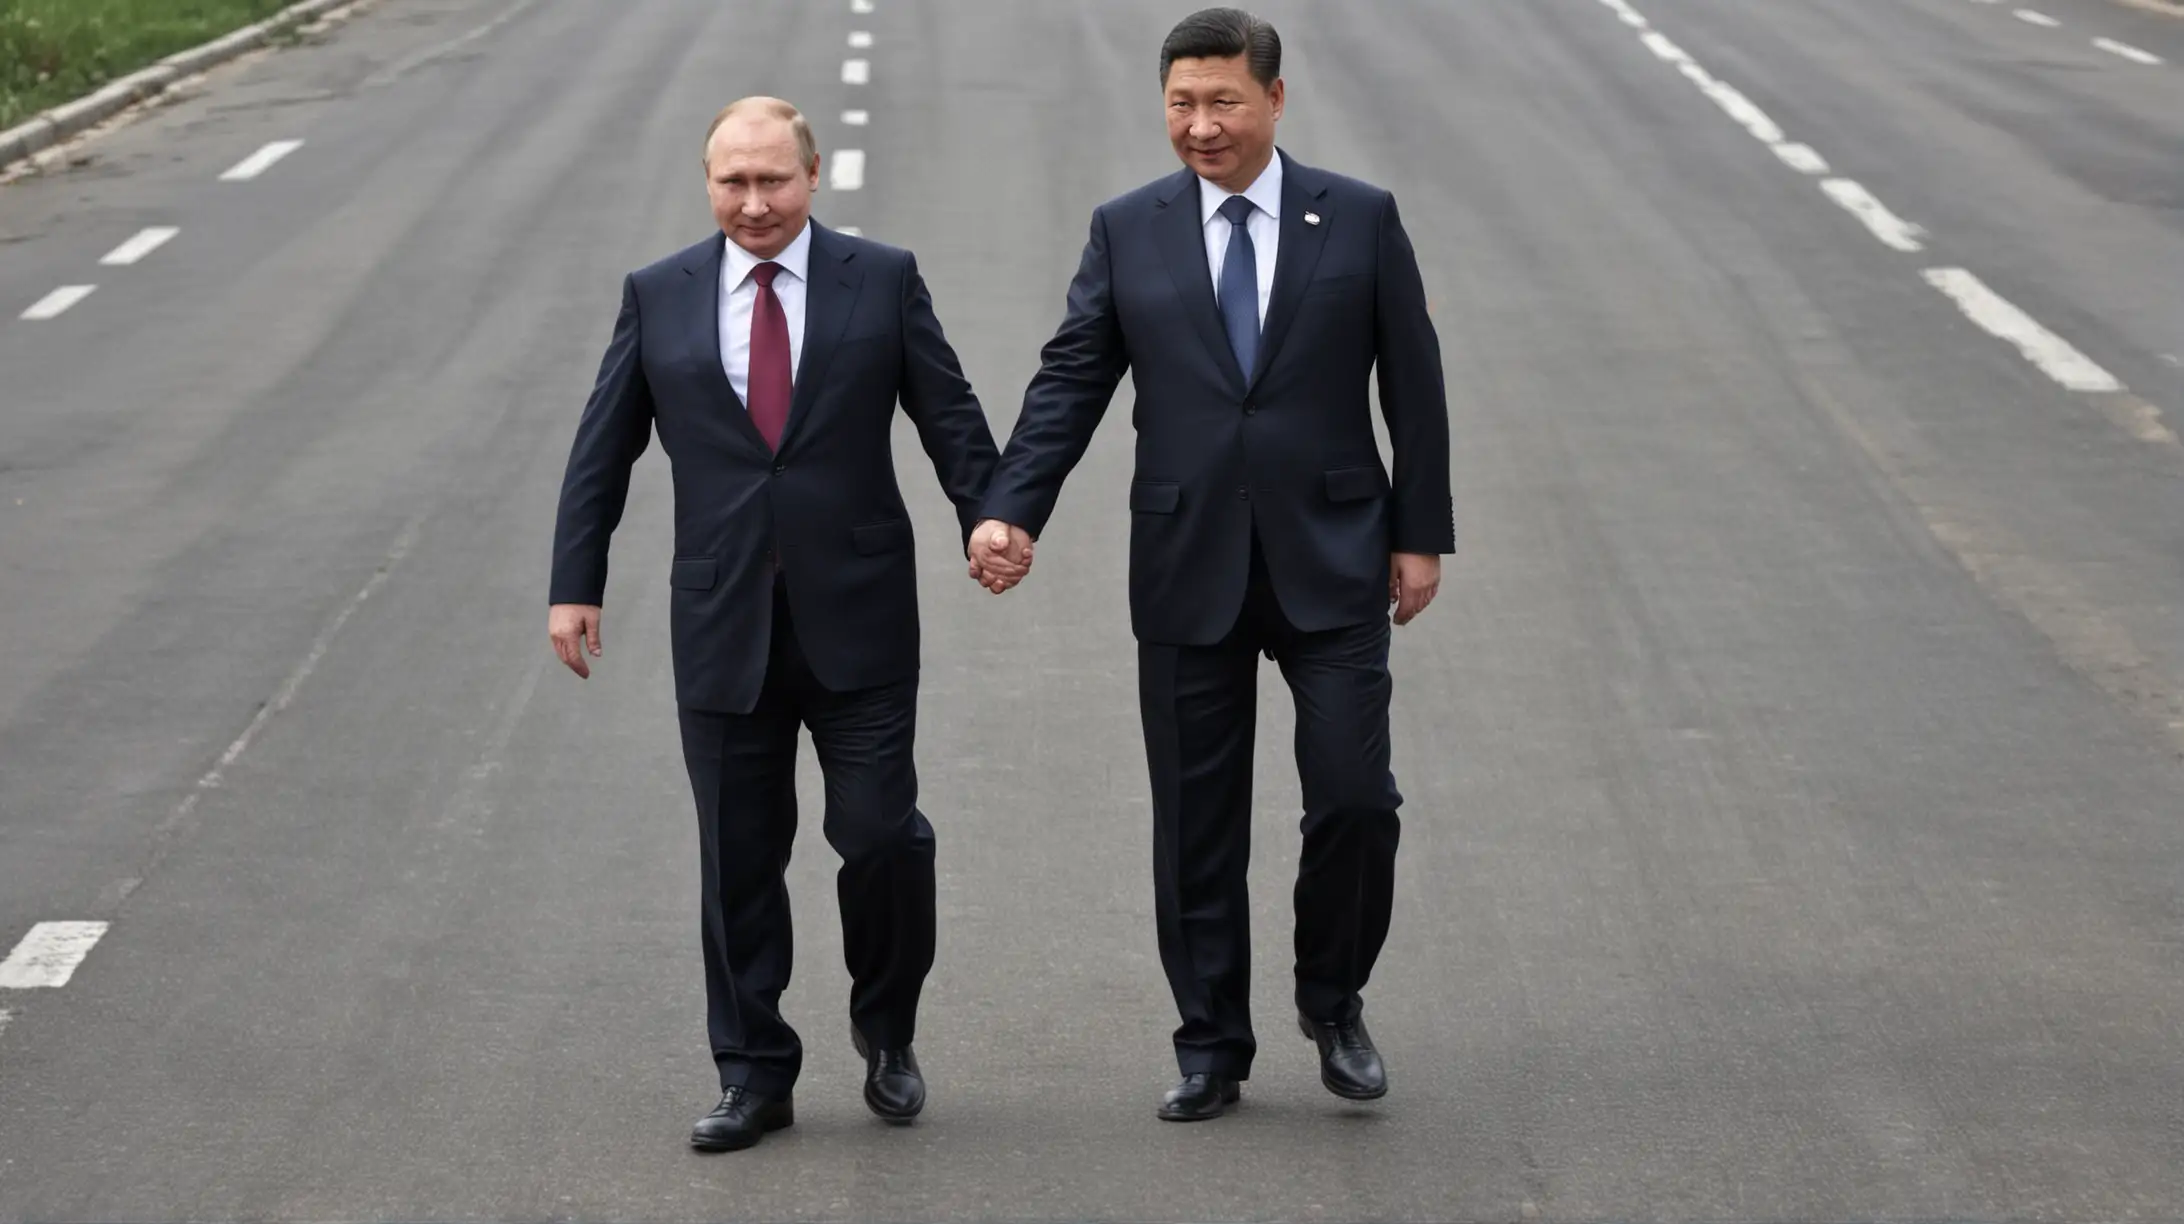 CHINESE PRESIDENT XI JINPING WALKING WHILE HOLDING THE HAND OF A RUSSIAN PRESIDENT VLADIMIR PUTIN looking like a dwarf ON A ROAD